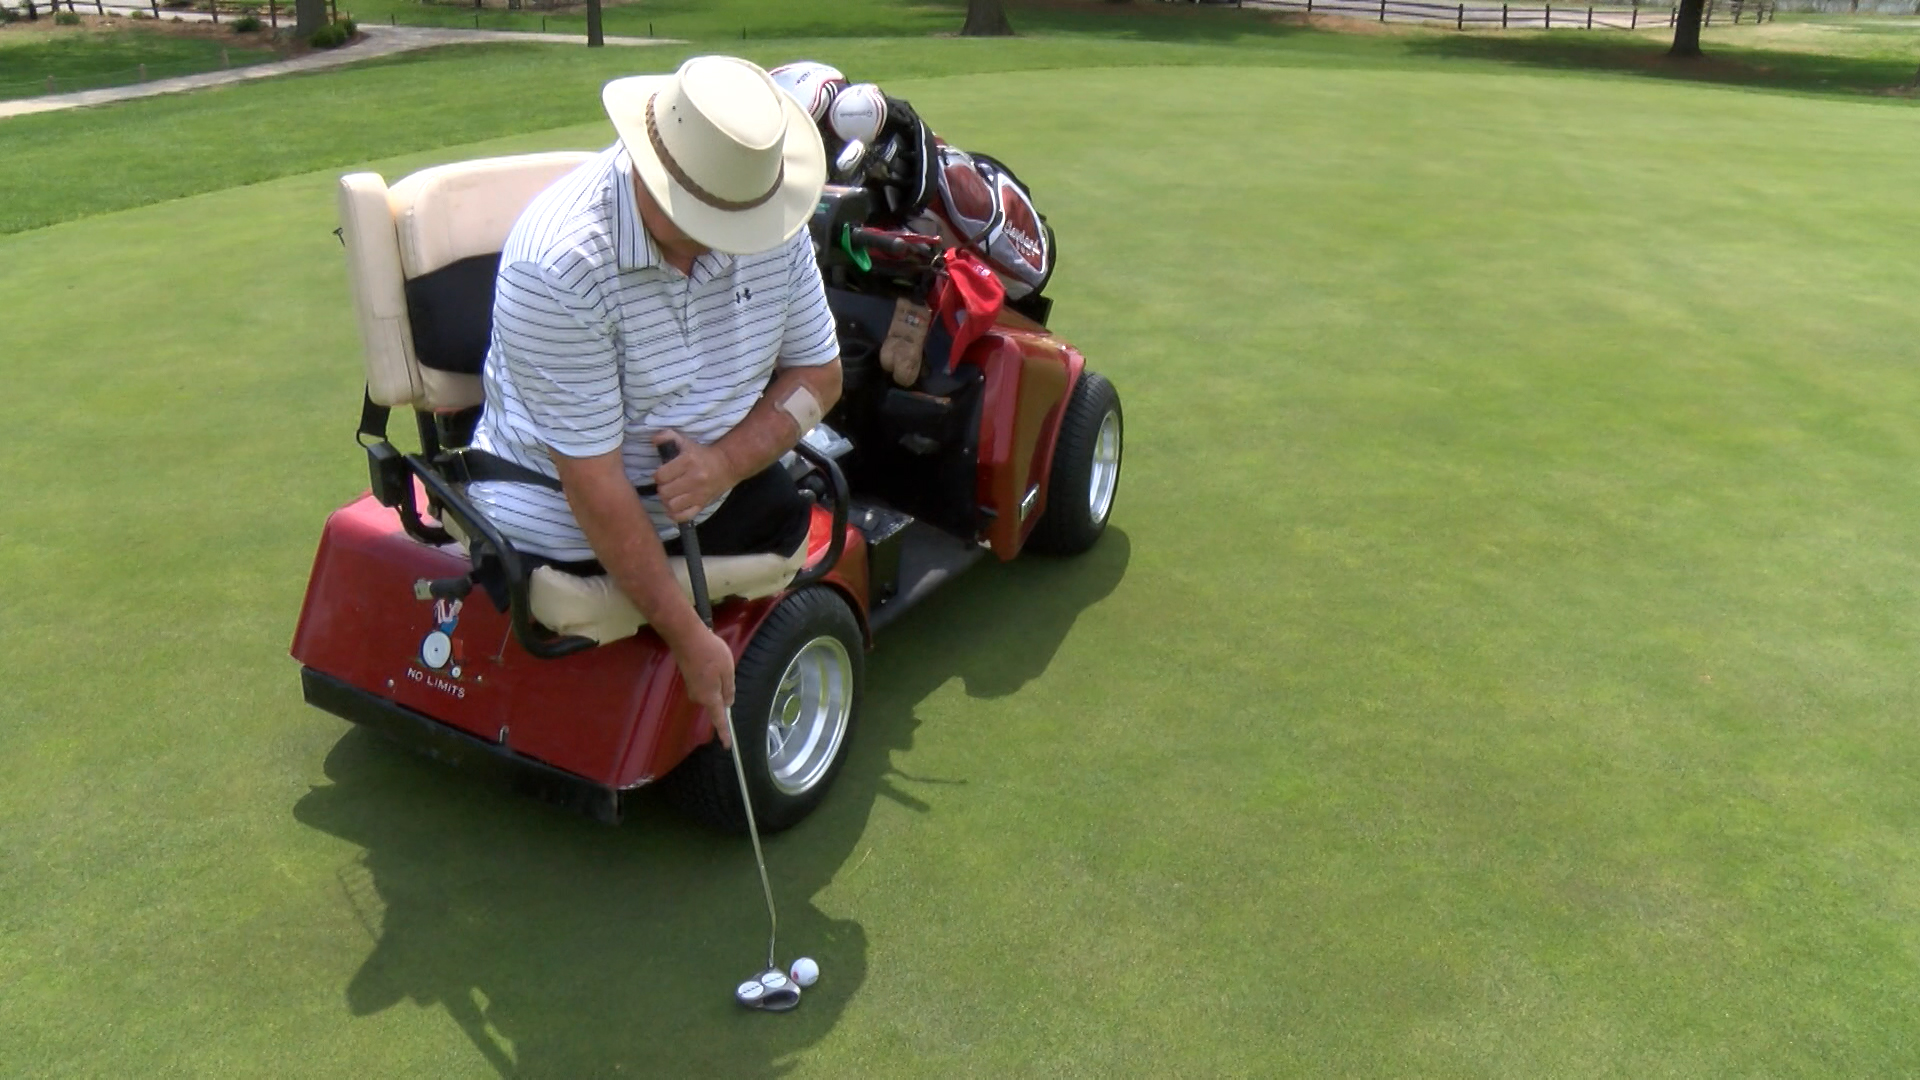 Open Vietnam veteran Gary York's single-rider cart is designed to drive onto greens and teeing grounds without damaging turf.